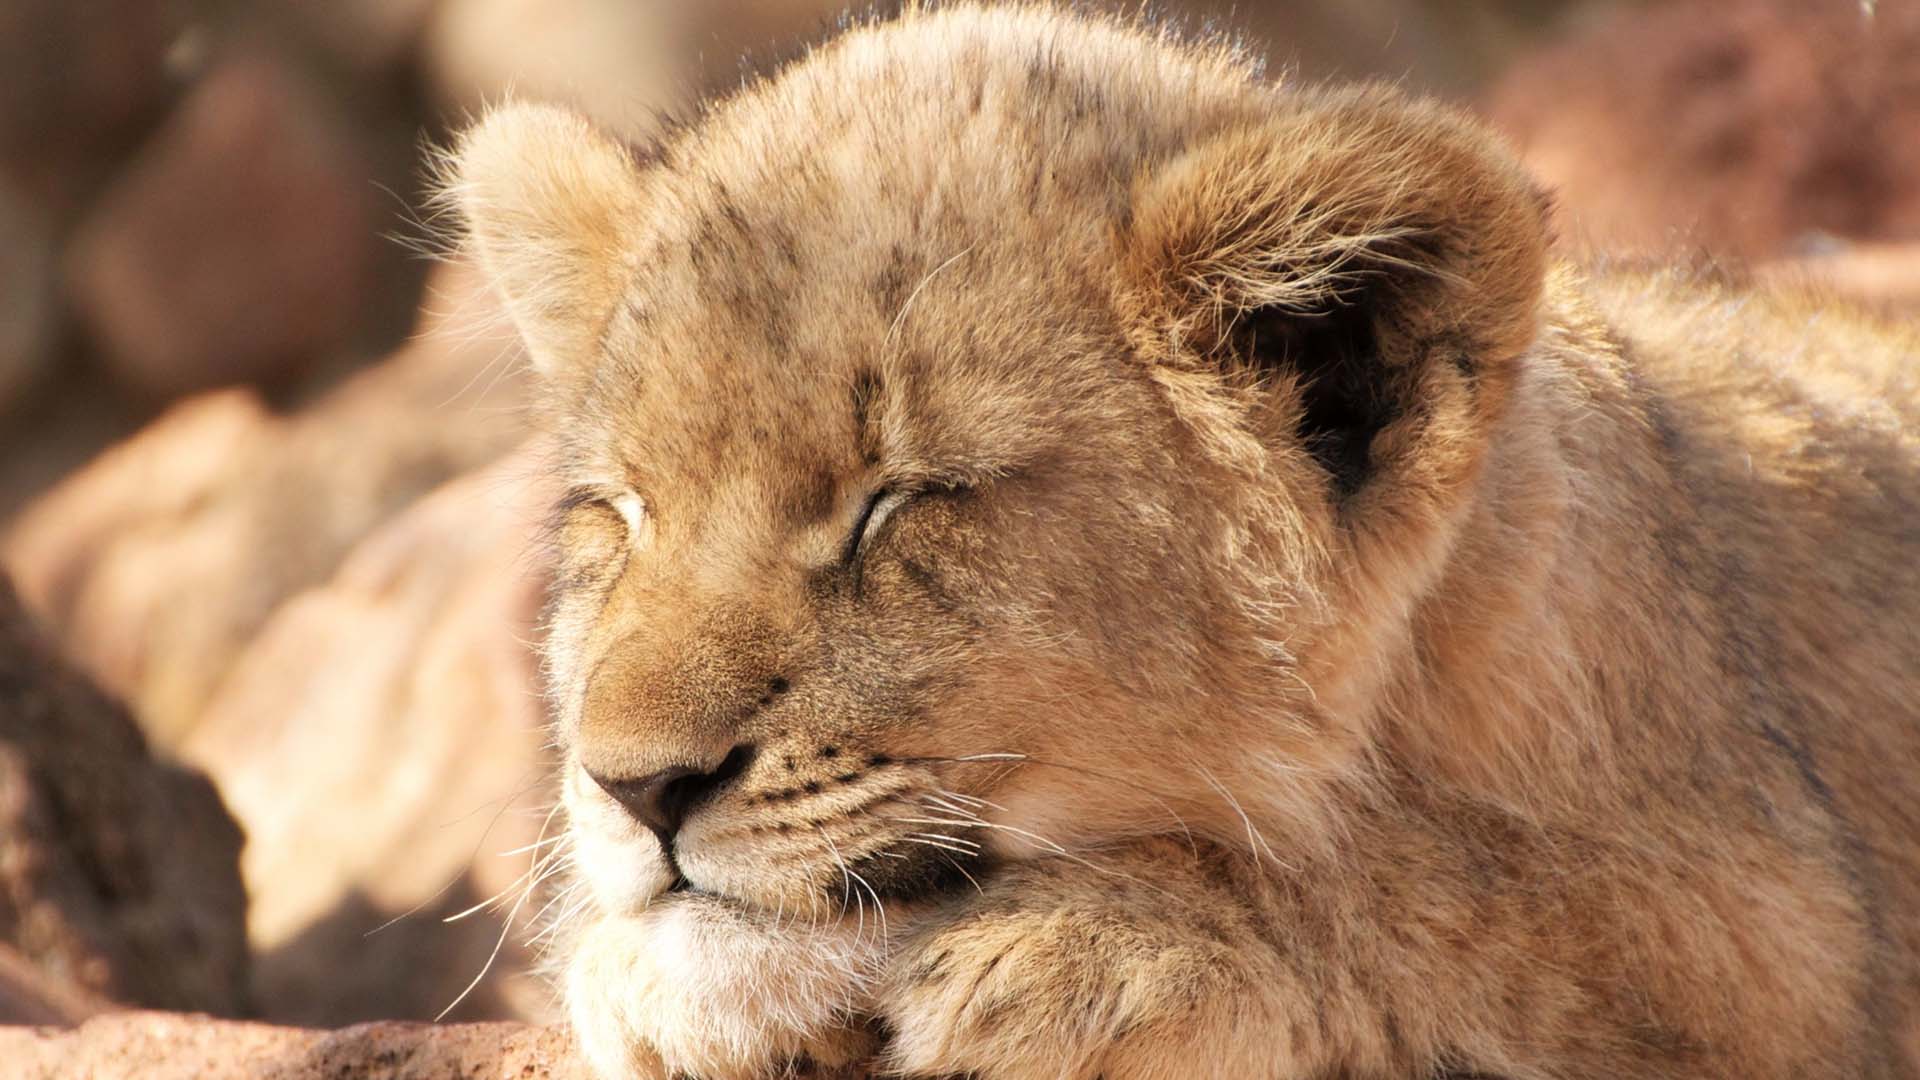 Taronga Zoo Has Just Welcomed Five African Lion Cubs and It's Live-Streaming Them 24/7